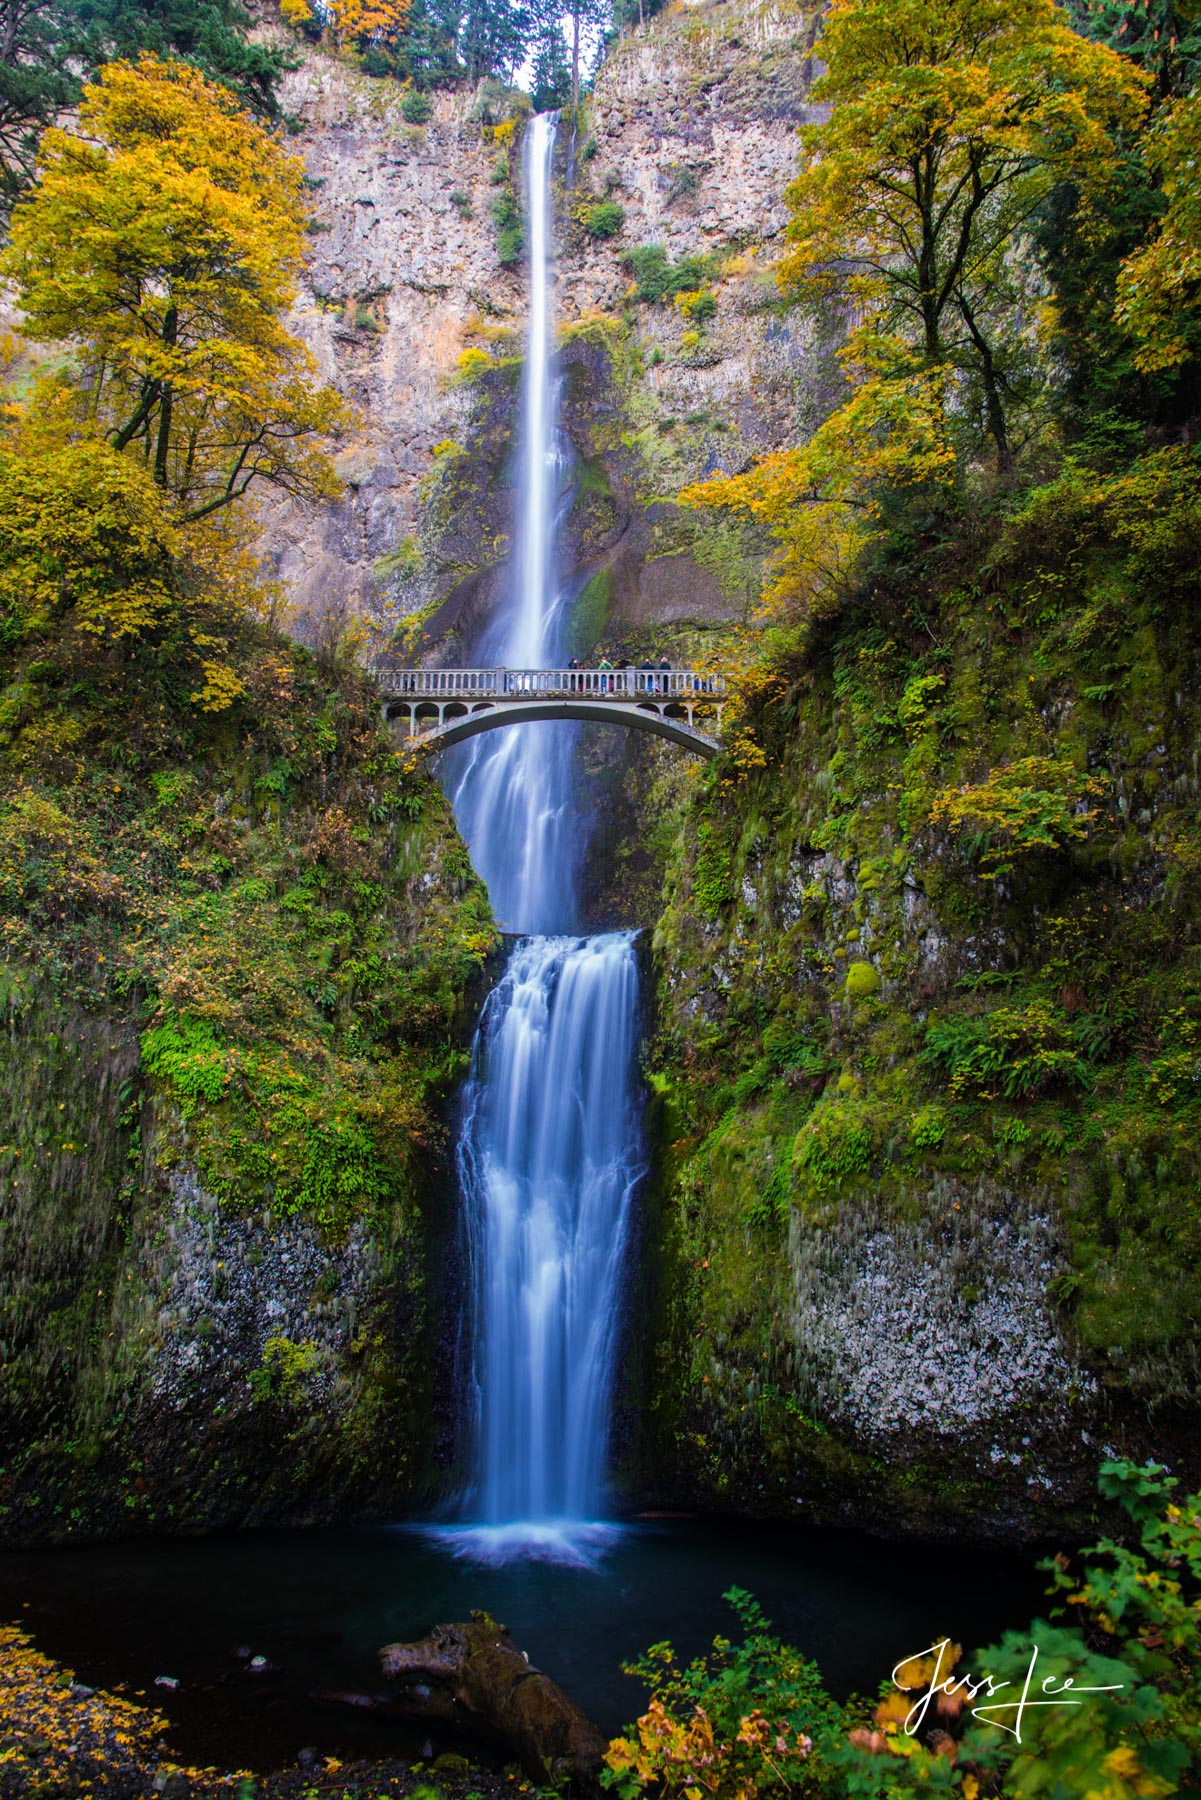 Limited Edition of 50 Exclusive high-resolution Museum Quality Fine Art Prints of Multnomah Falls. Photo Copyright © Jess Lee...